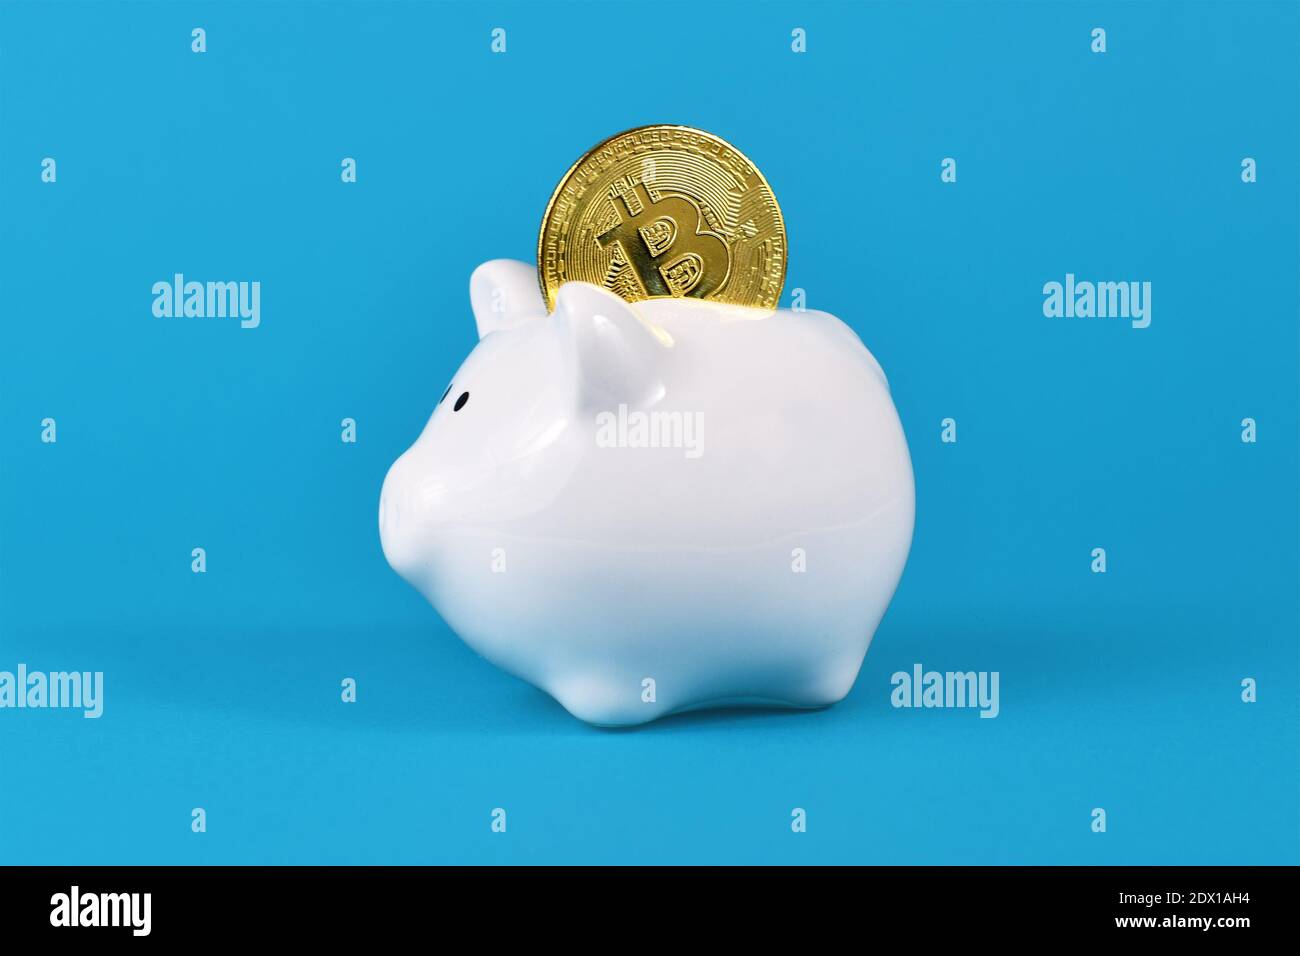 Golden crypto currency bitcoin in white piggy bank on blue background Stock Photo